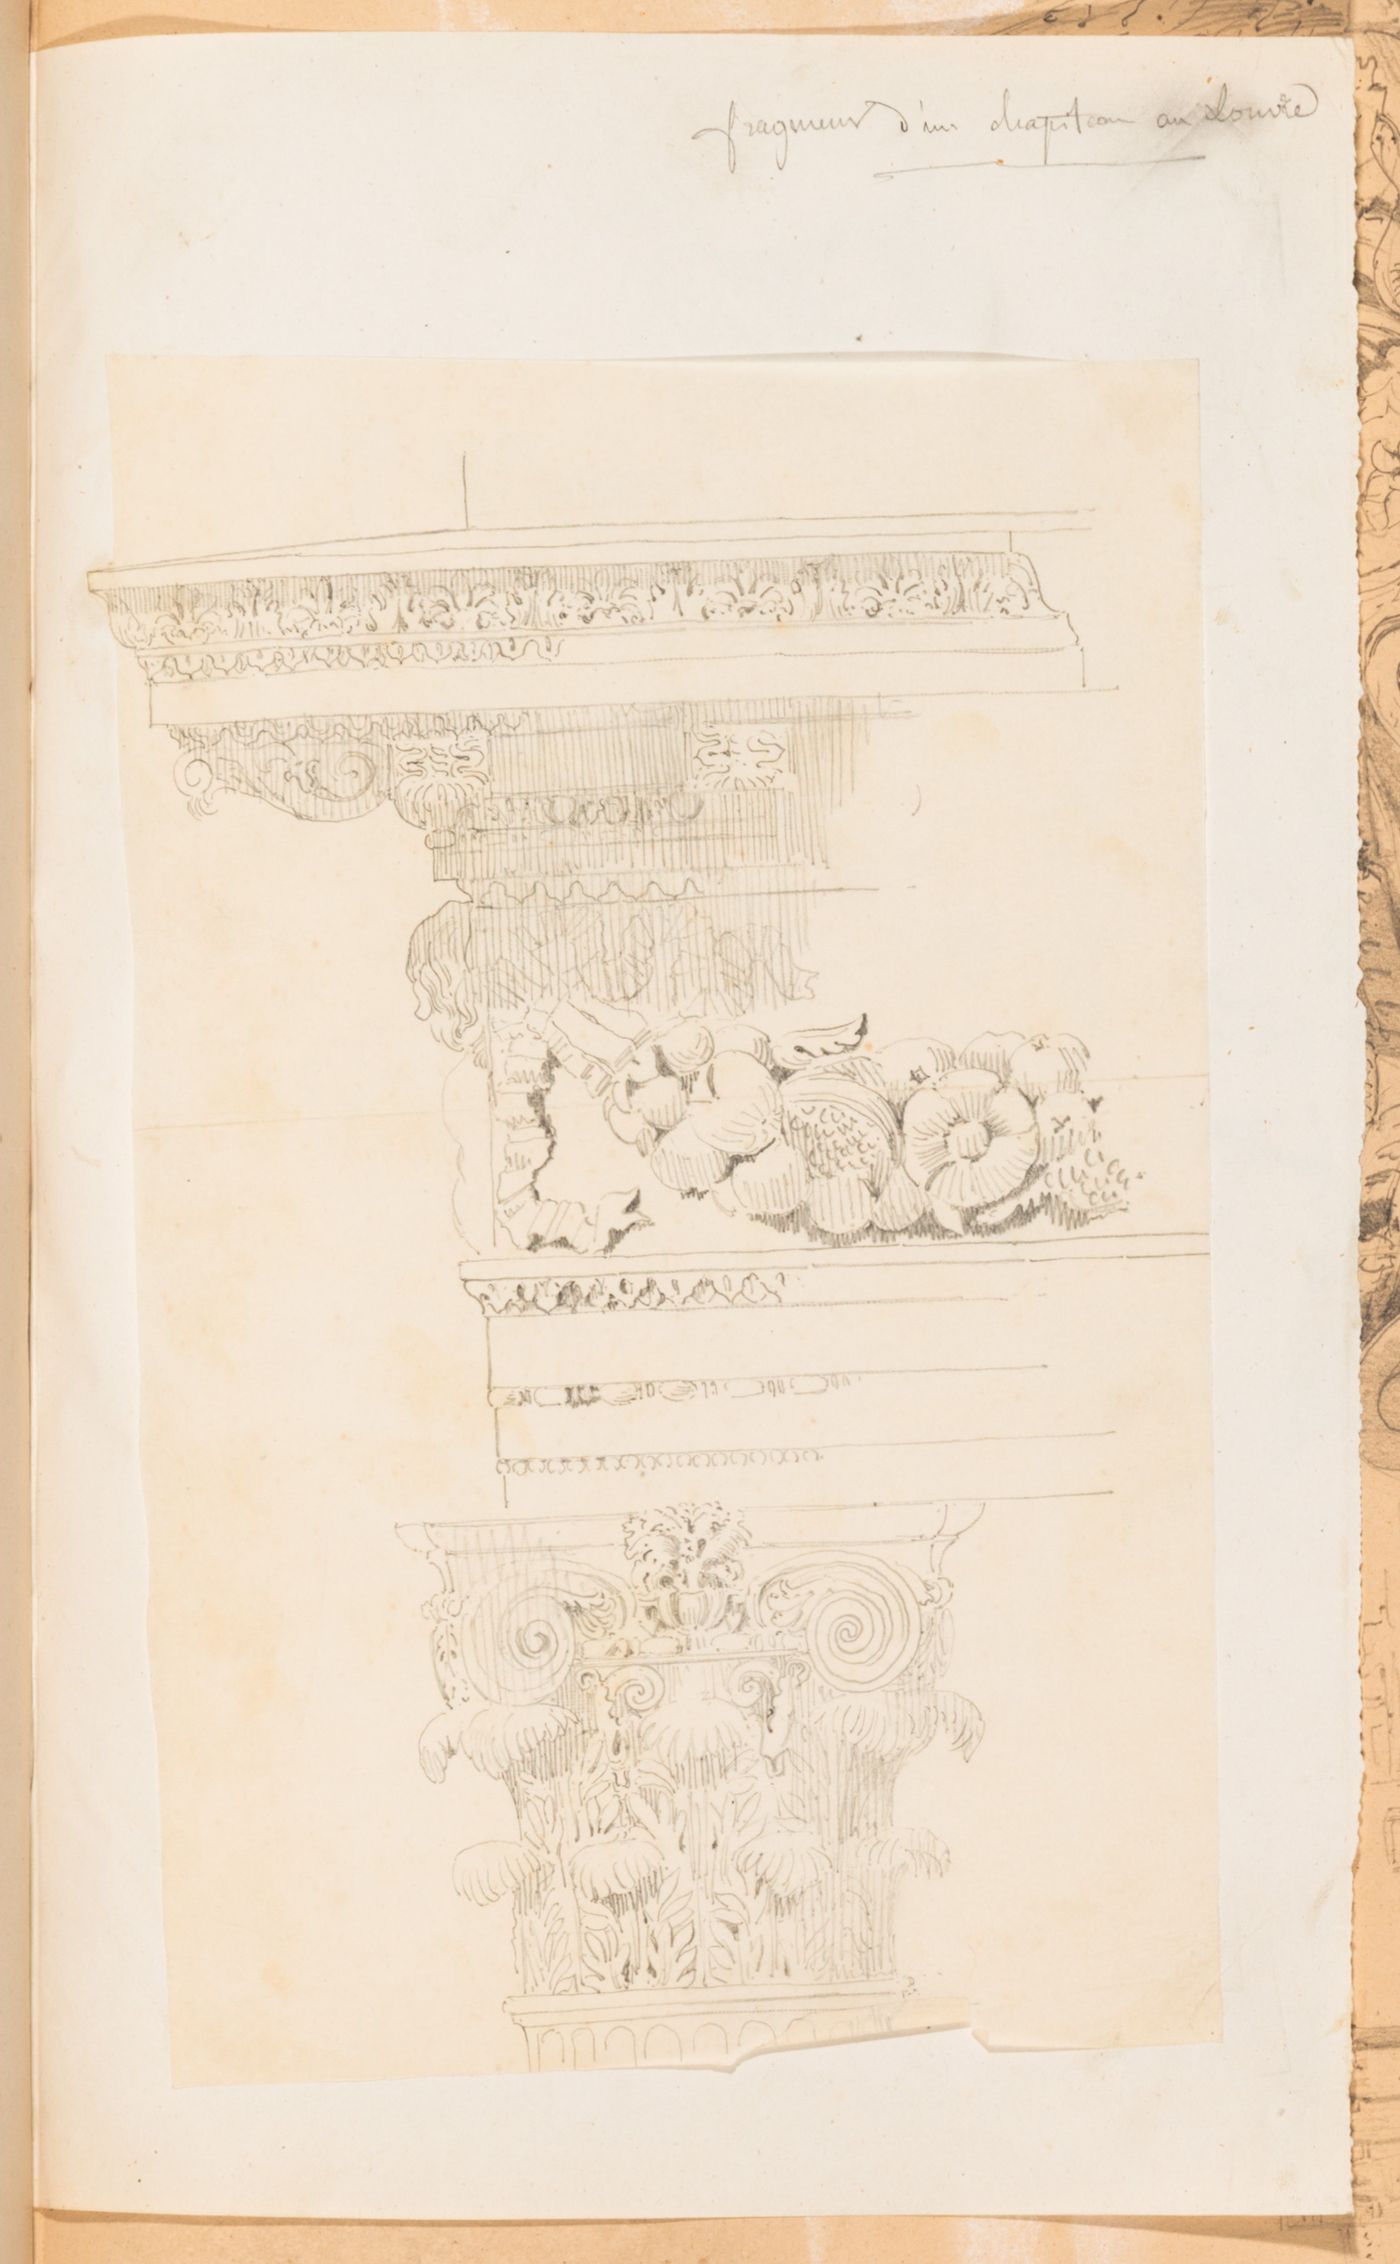 Elevation of a Composite capital and entablature from the Louvre